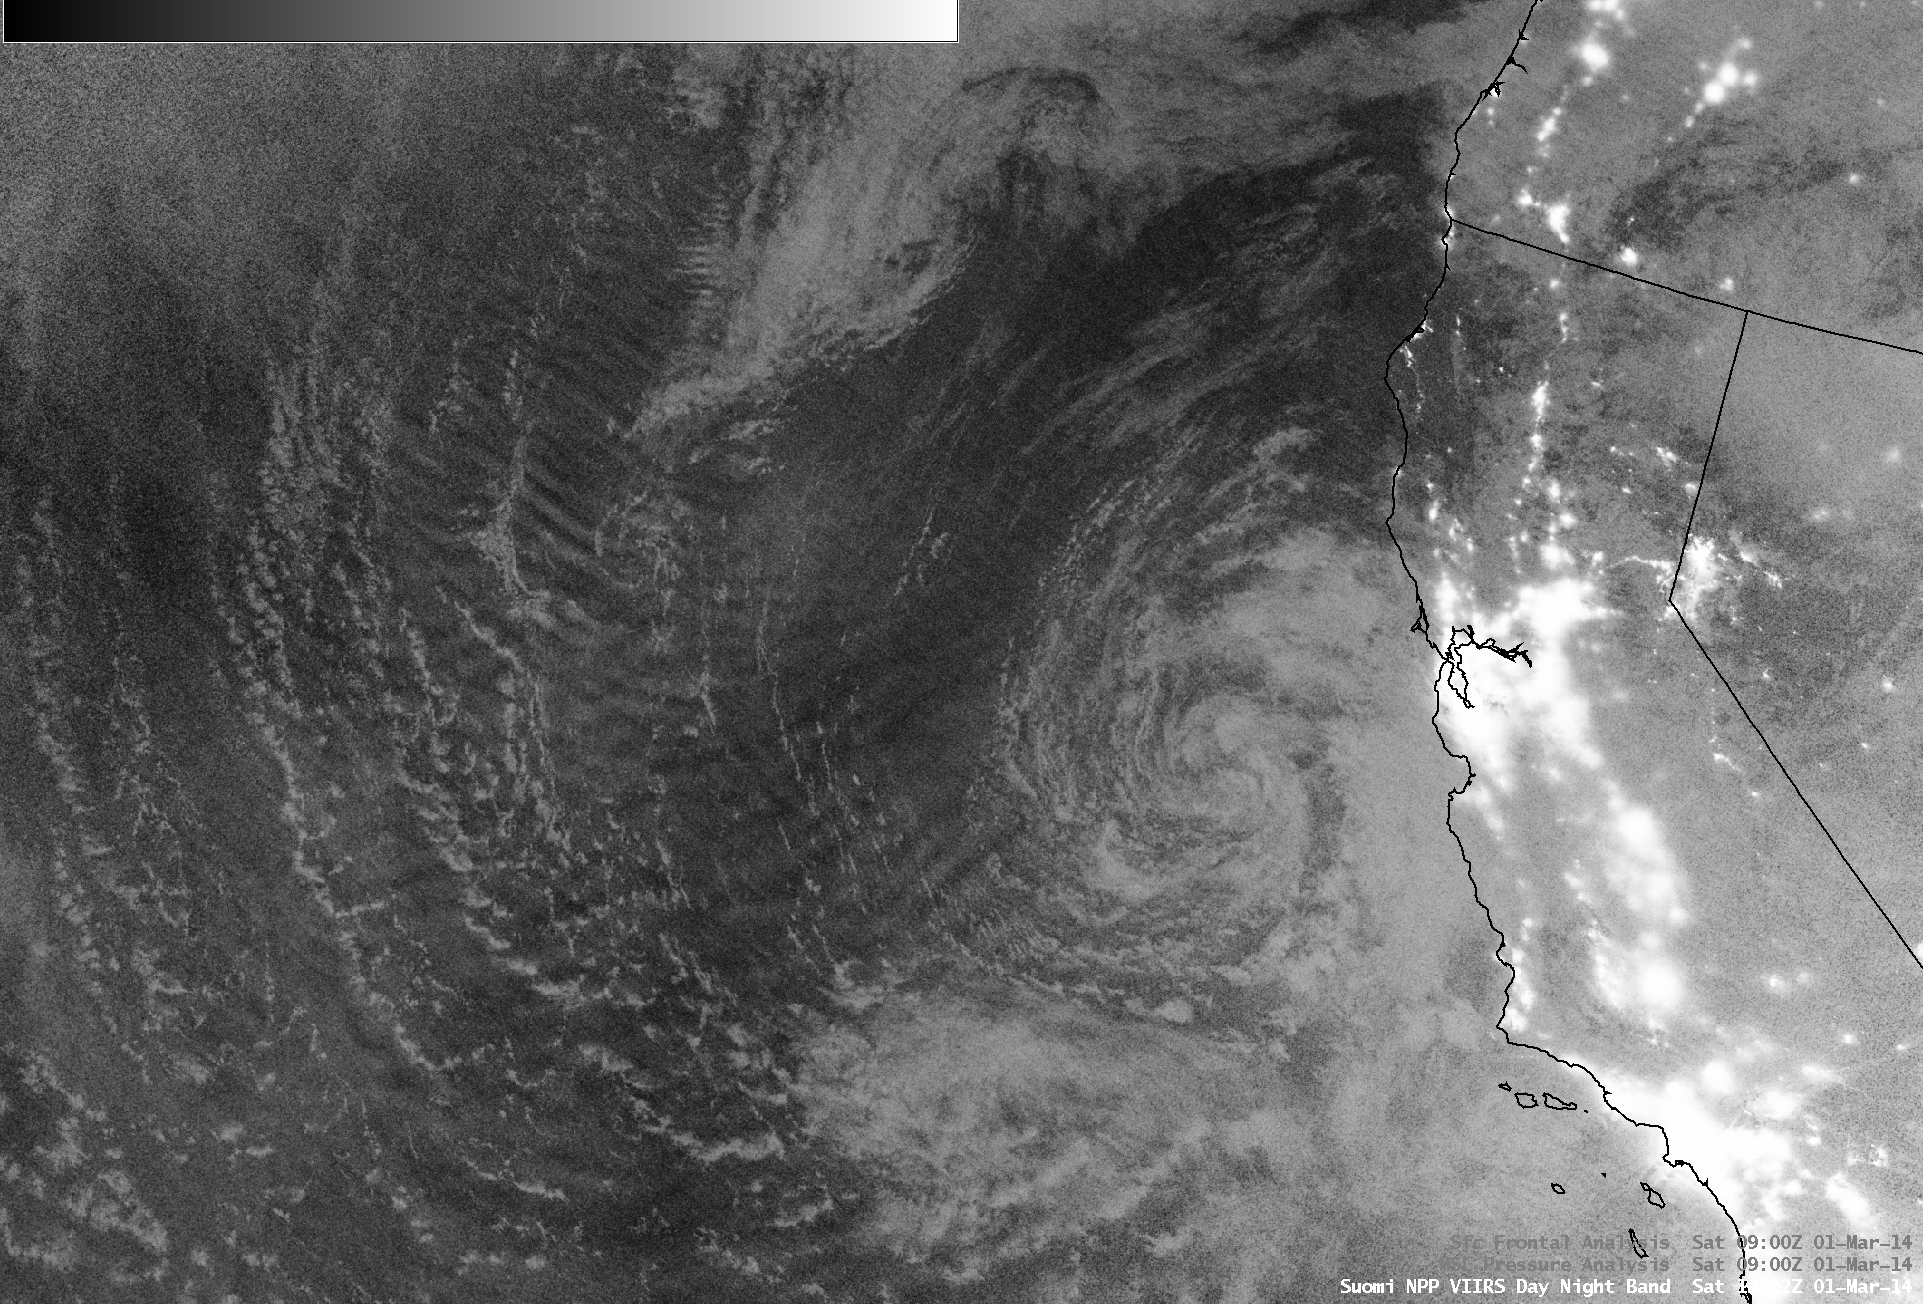 Suomi NPP VIIRS 0.7 Âµm Day/Night Band image with NAM 250 hPa winds and isotachs